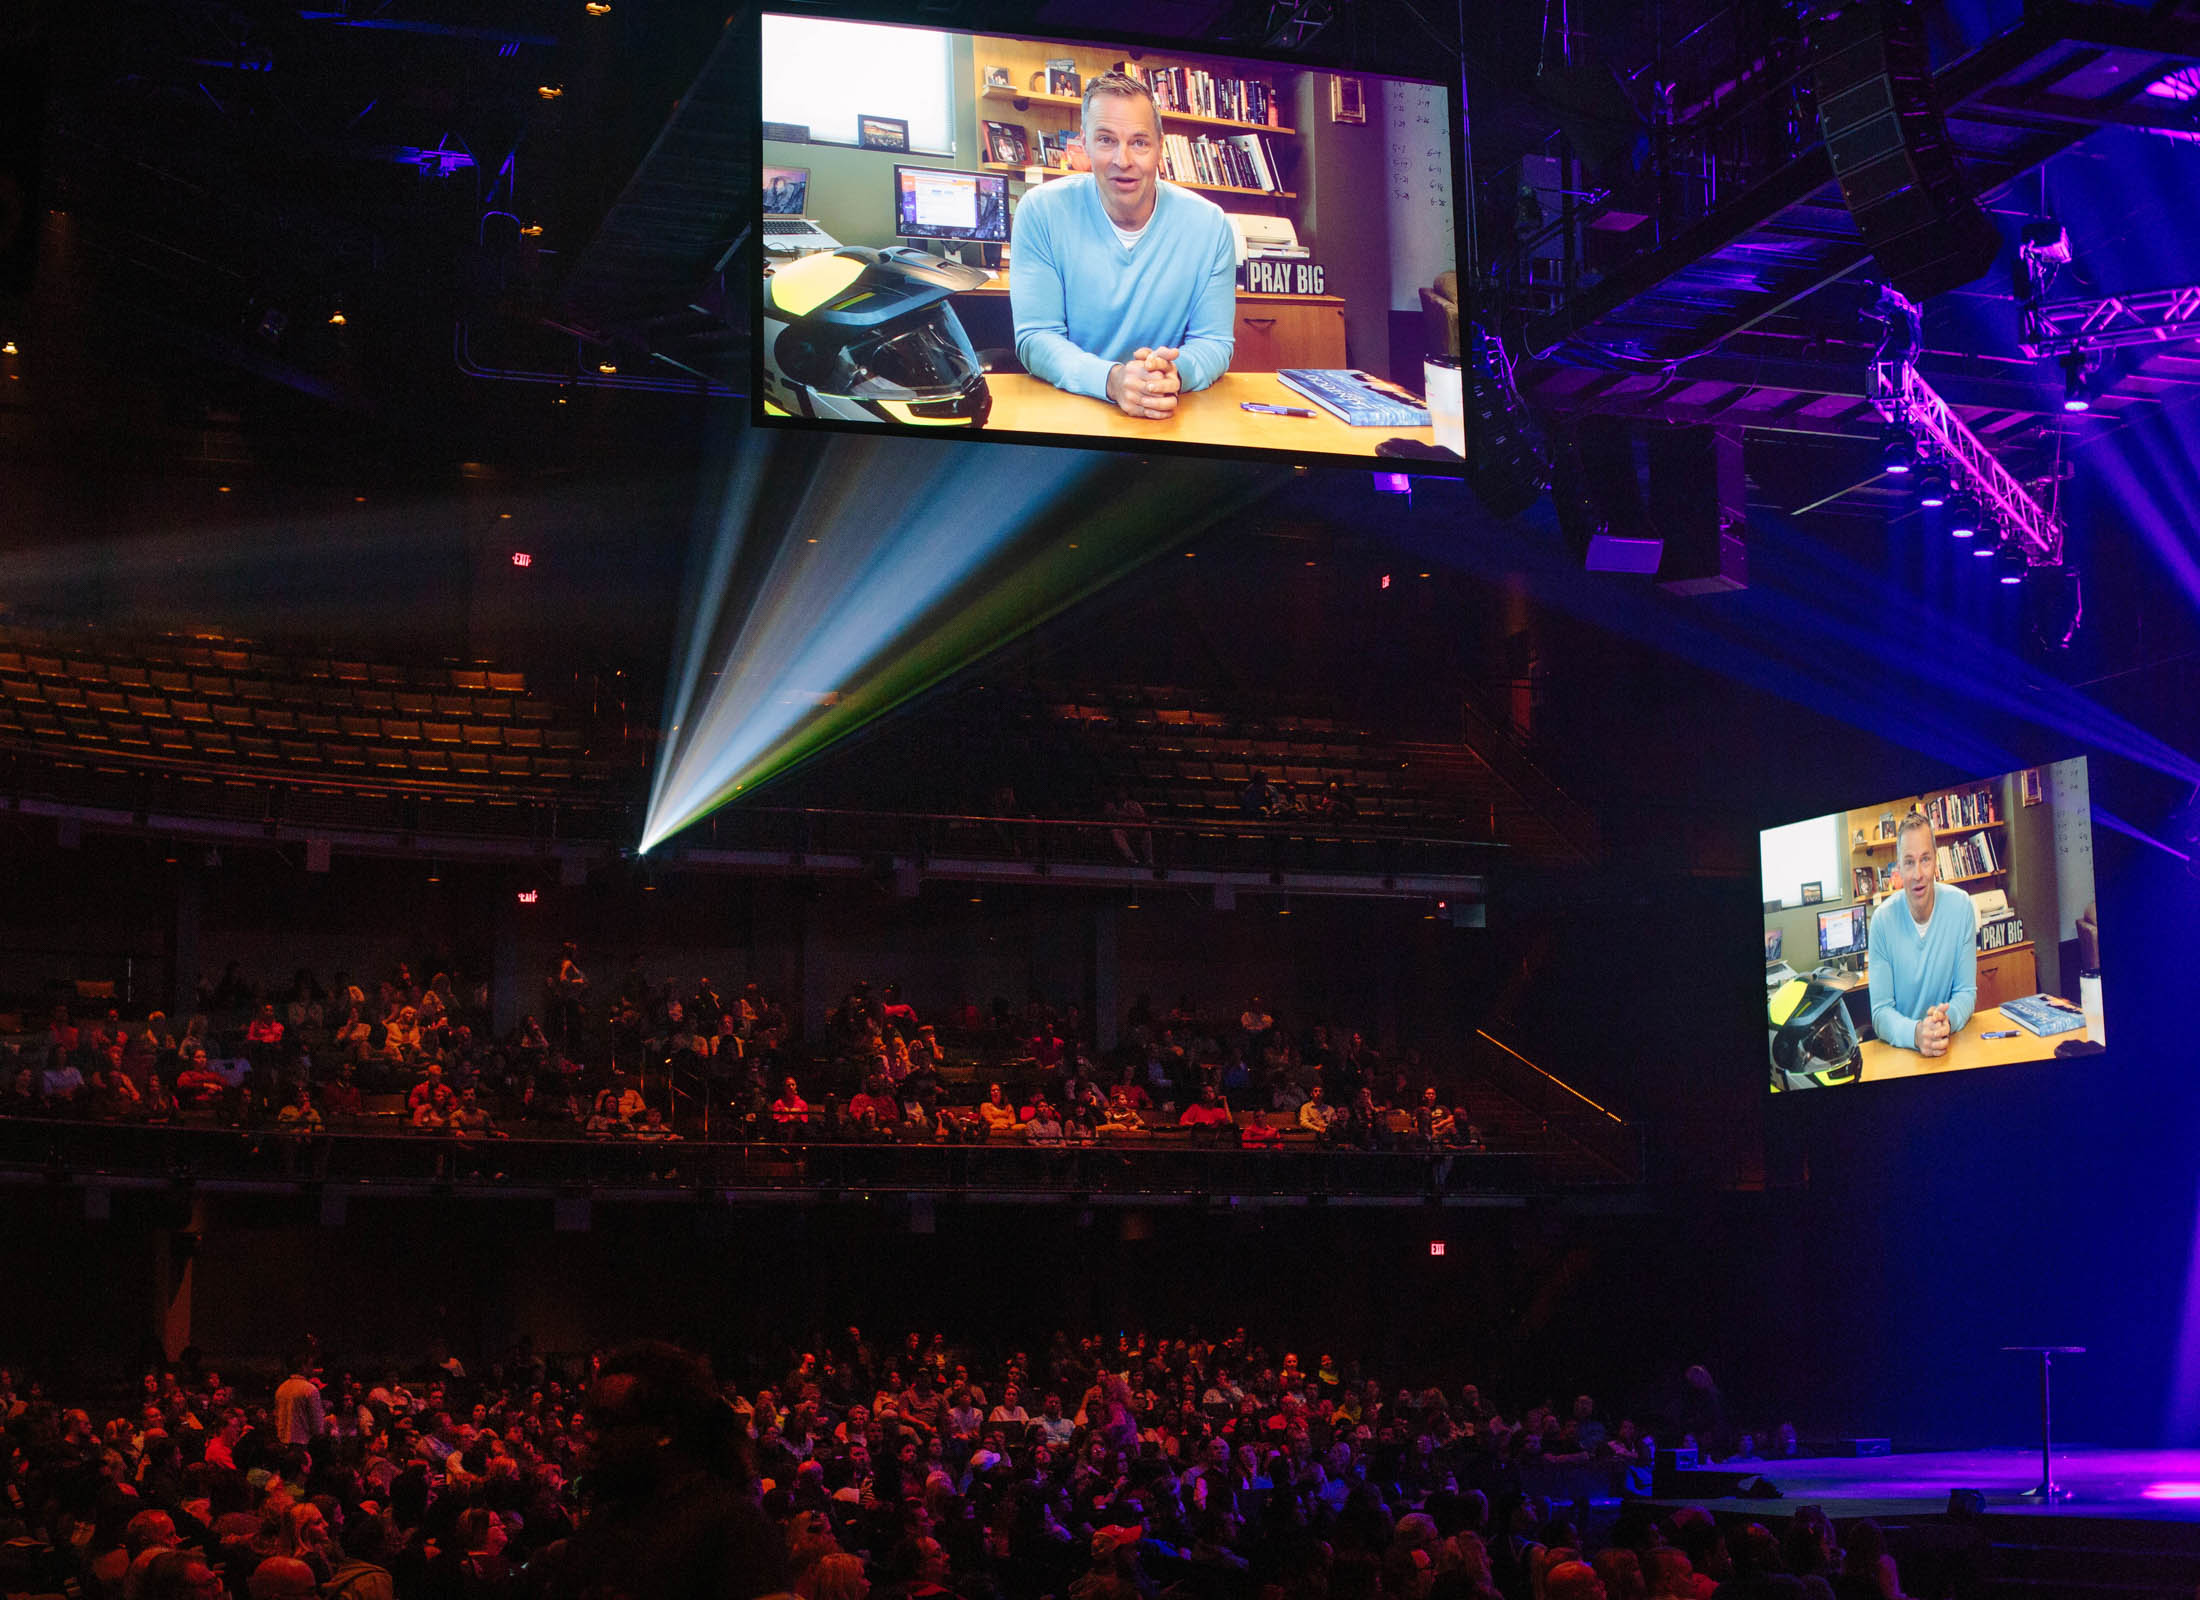 Brian Tome, senior pastor at Crossroads, appears in a recorded message during a service in Cincinnati.
